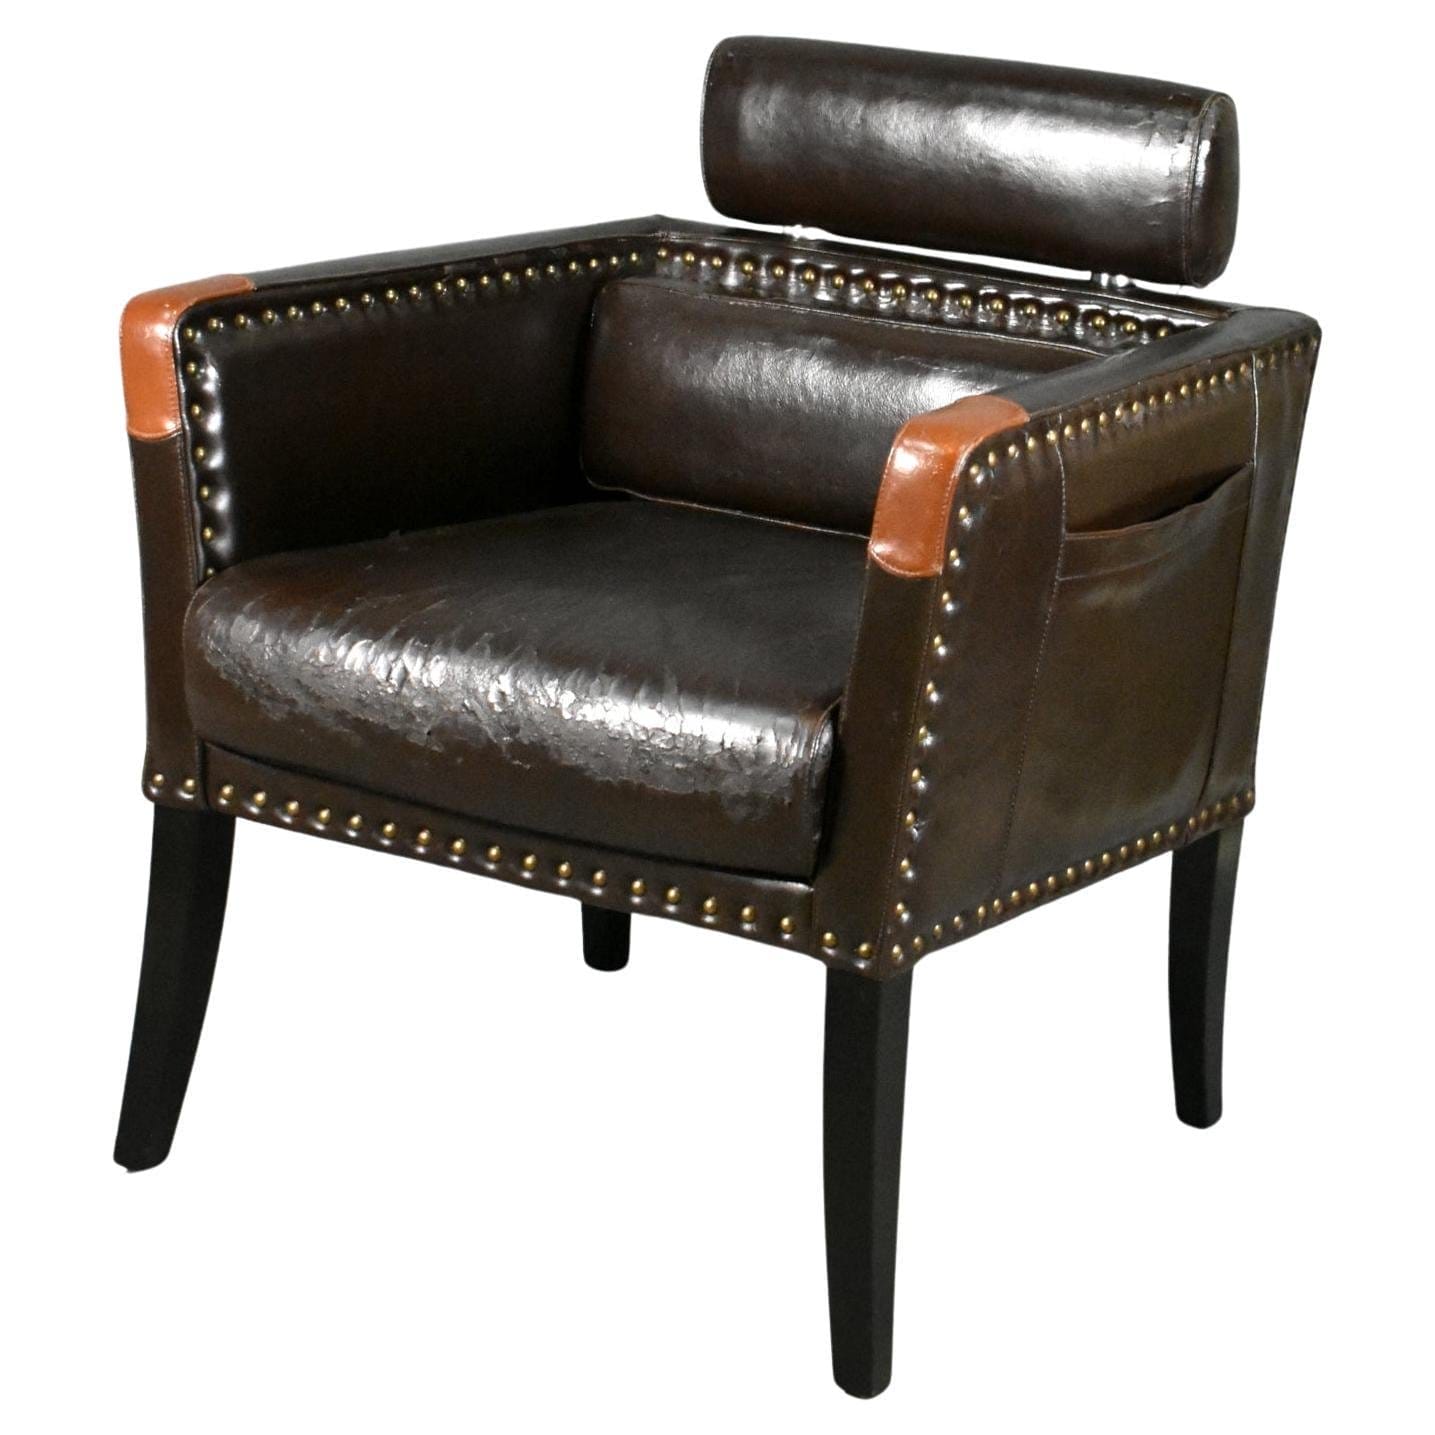 Display Images to View French Mid-Century Lounge Chair in Leatherette.